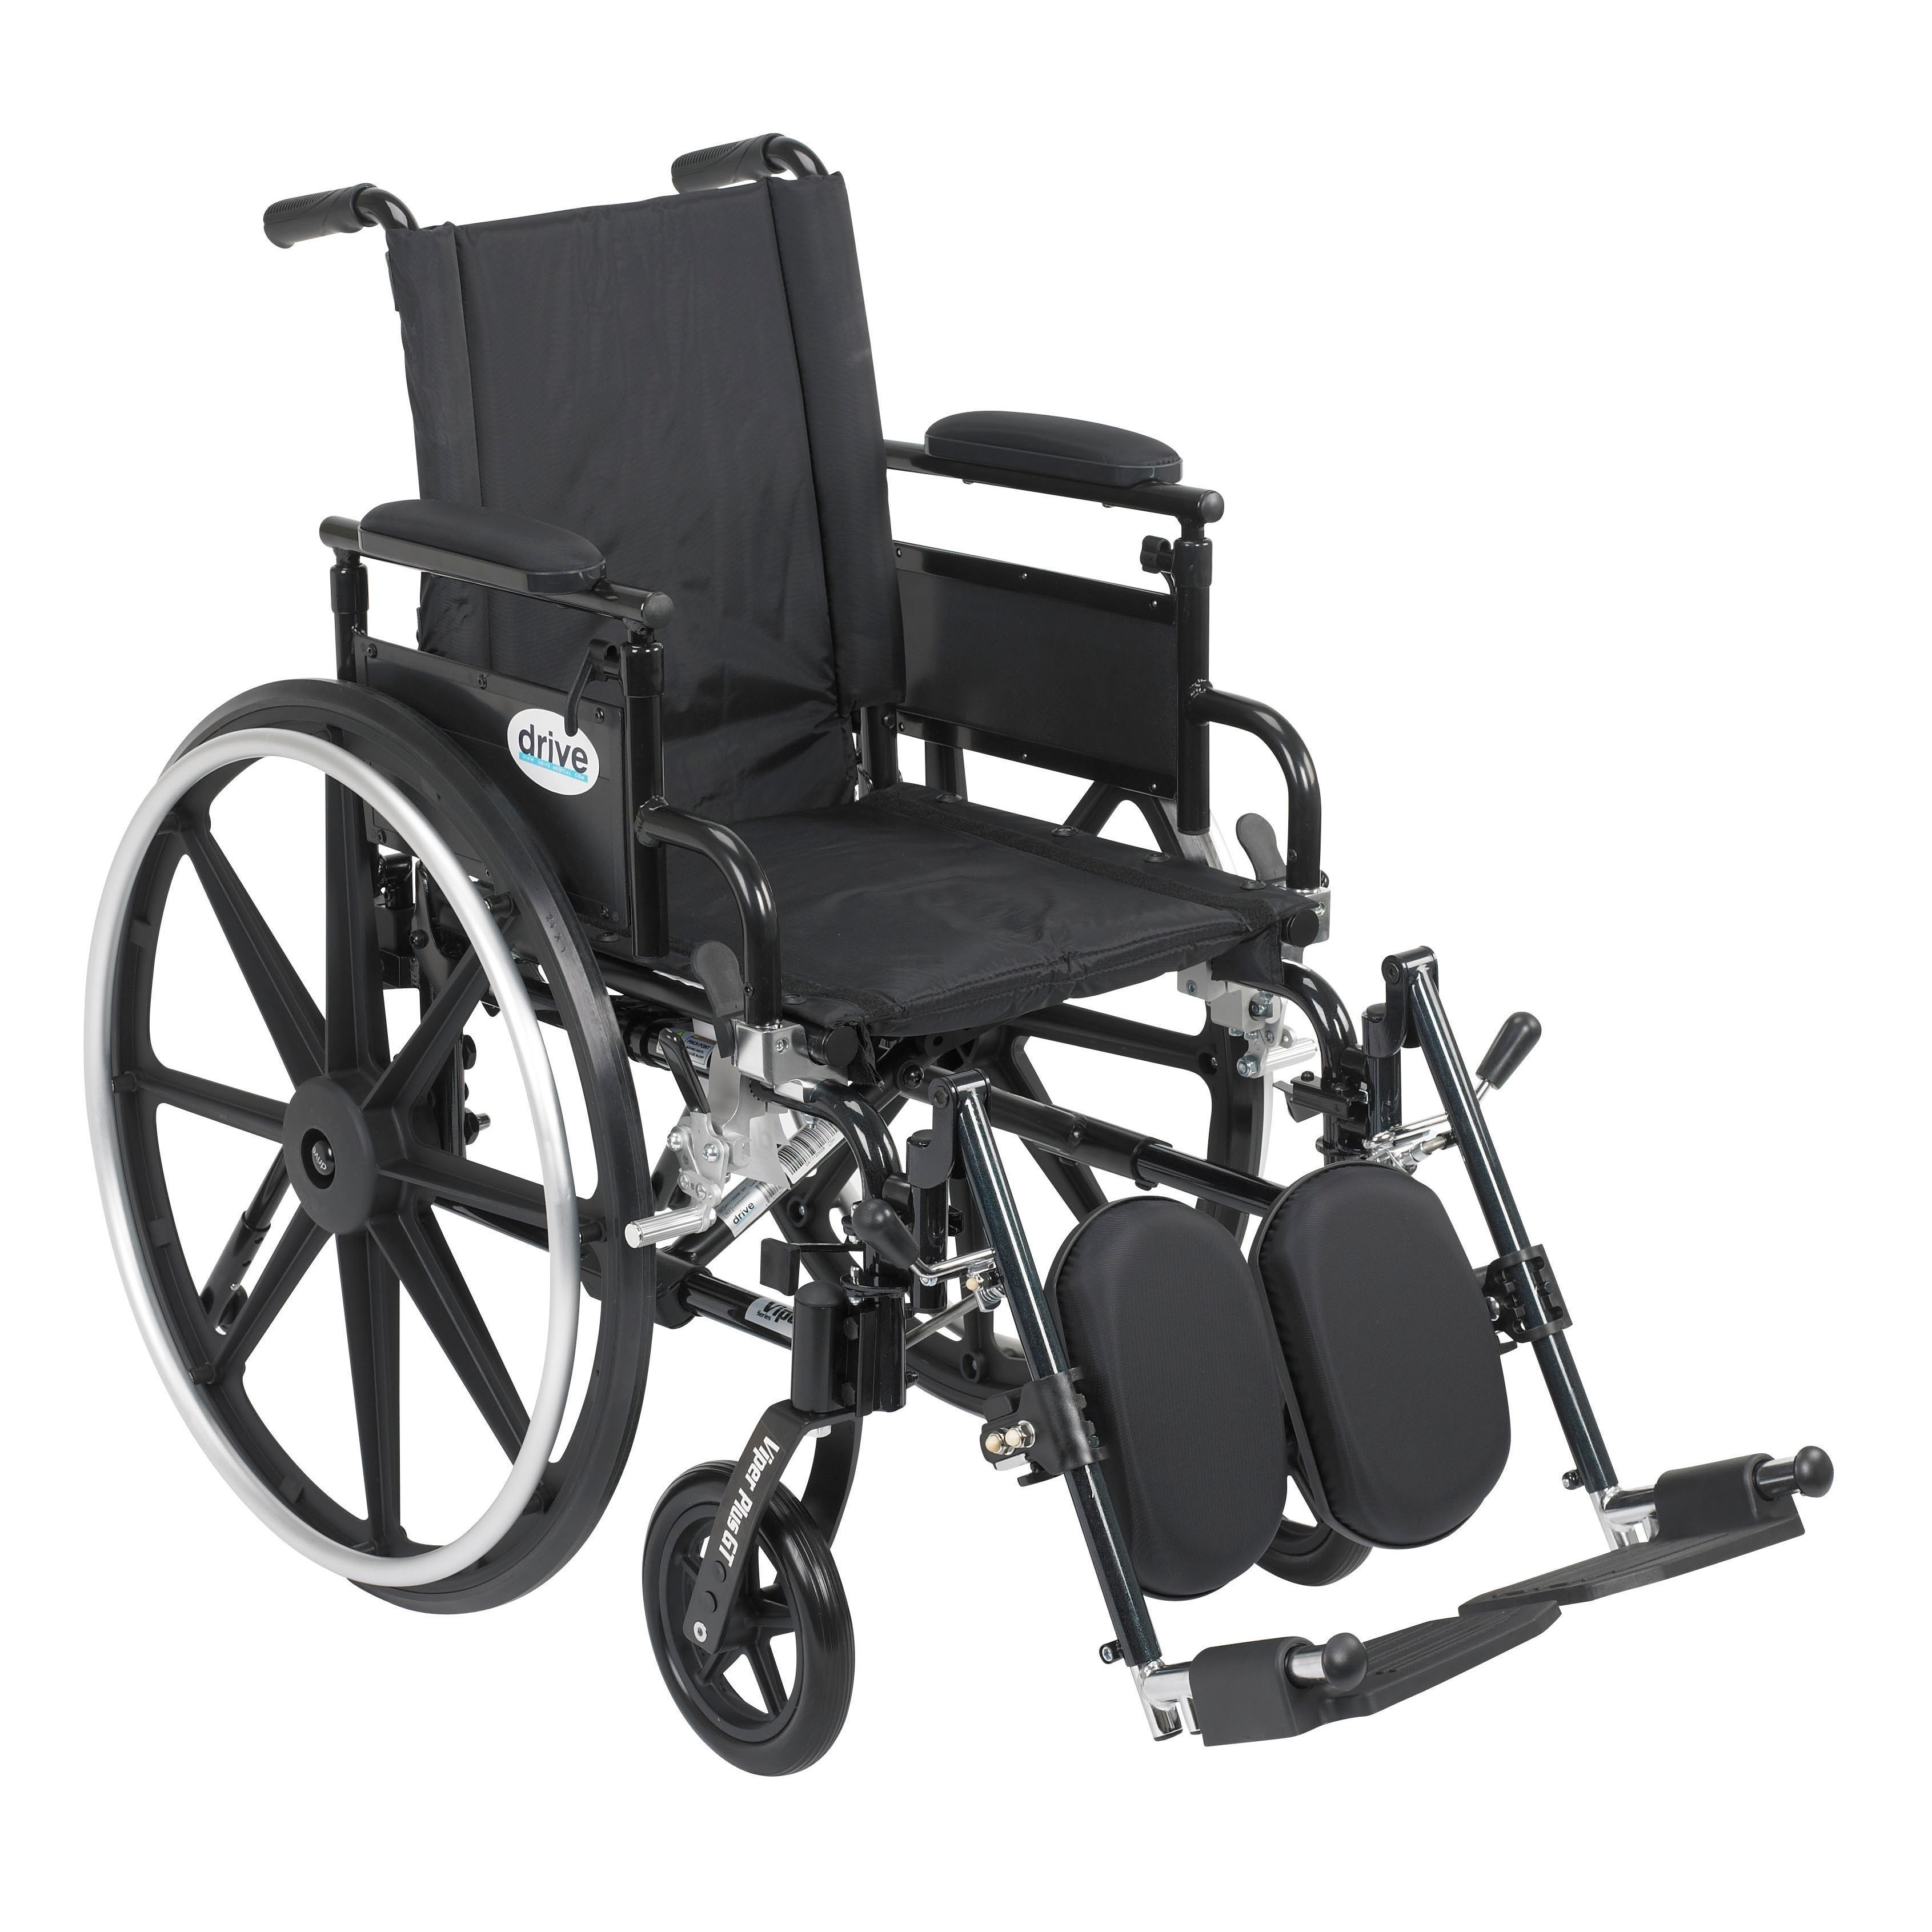 Viper Plus GT Wheelchair with Flip Back Adjustable Arms with Various